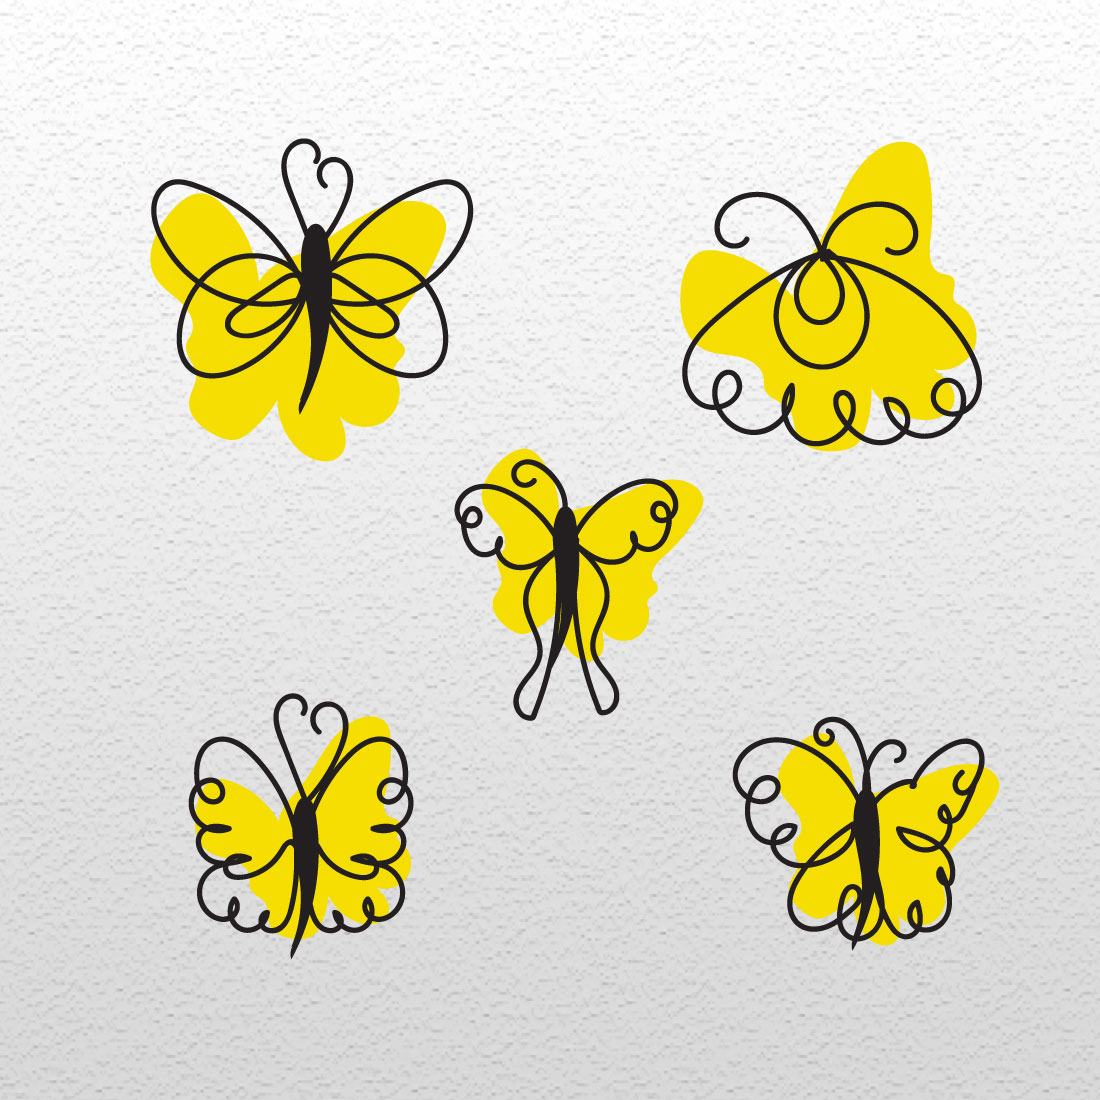 Group of yellow butterflies on a white background.